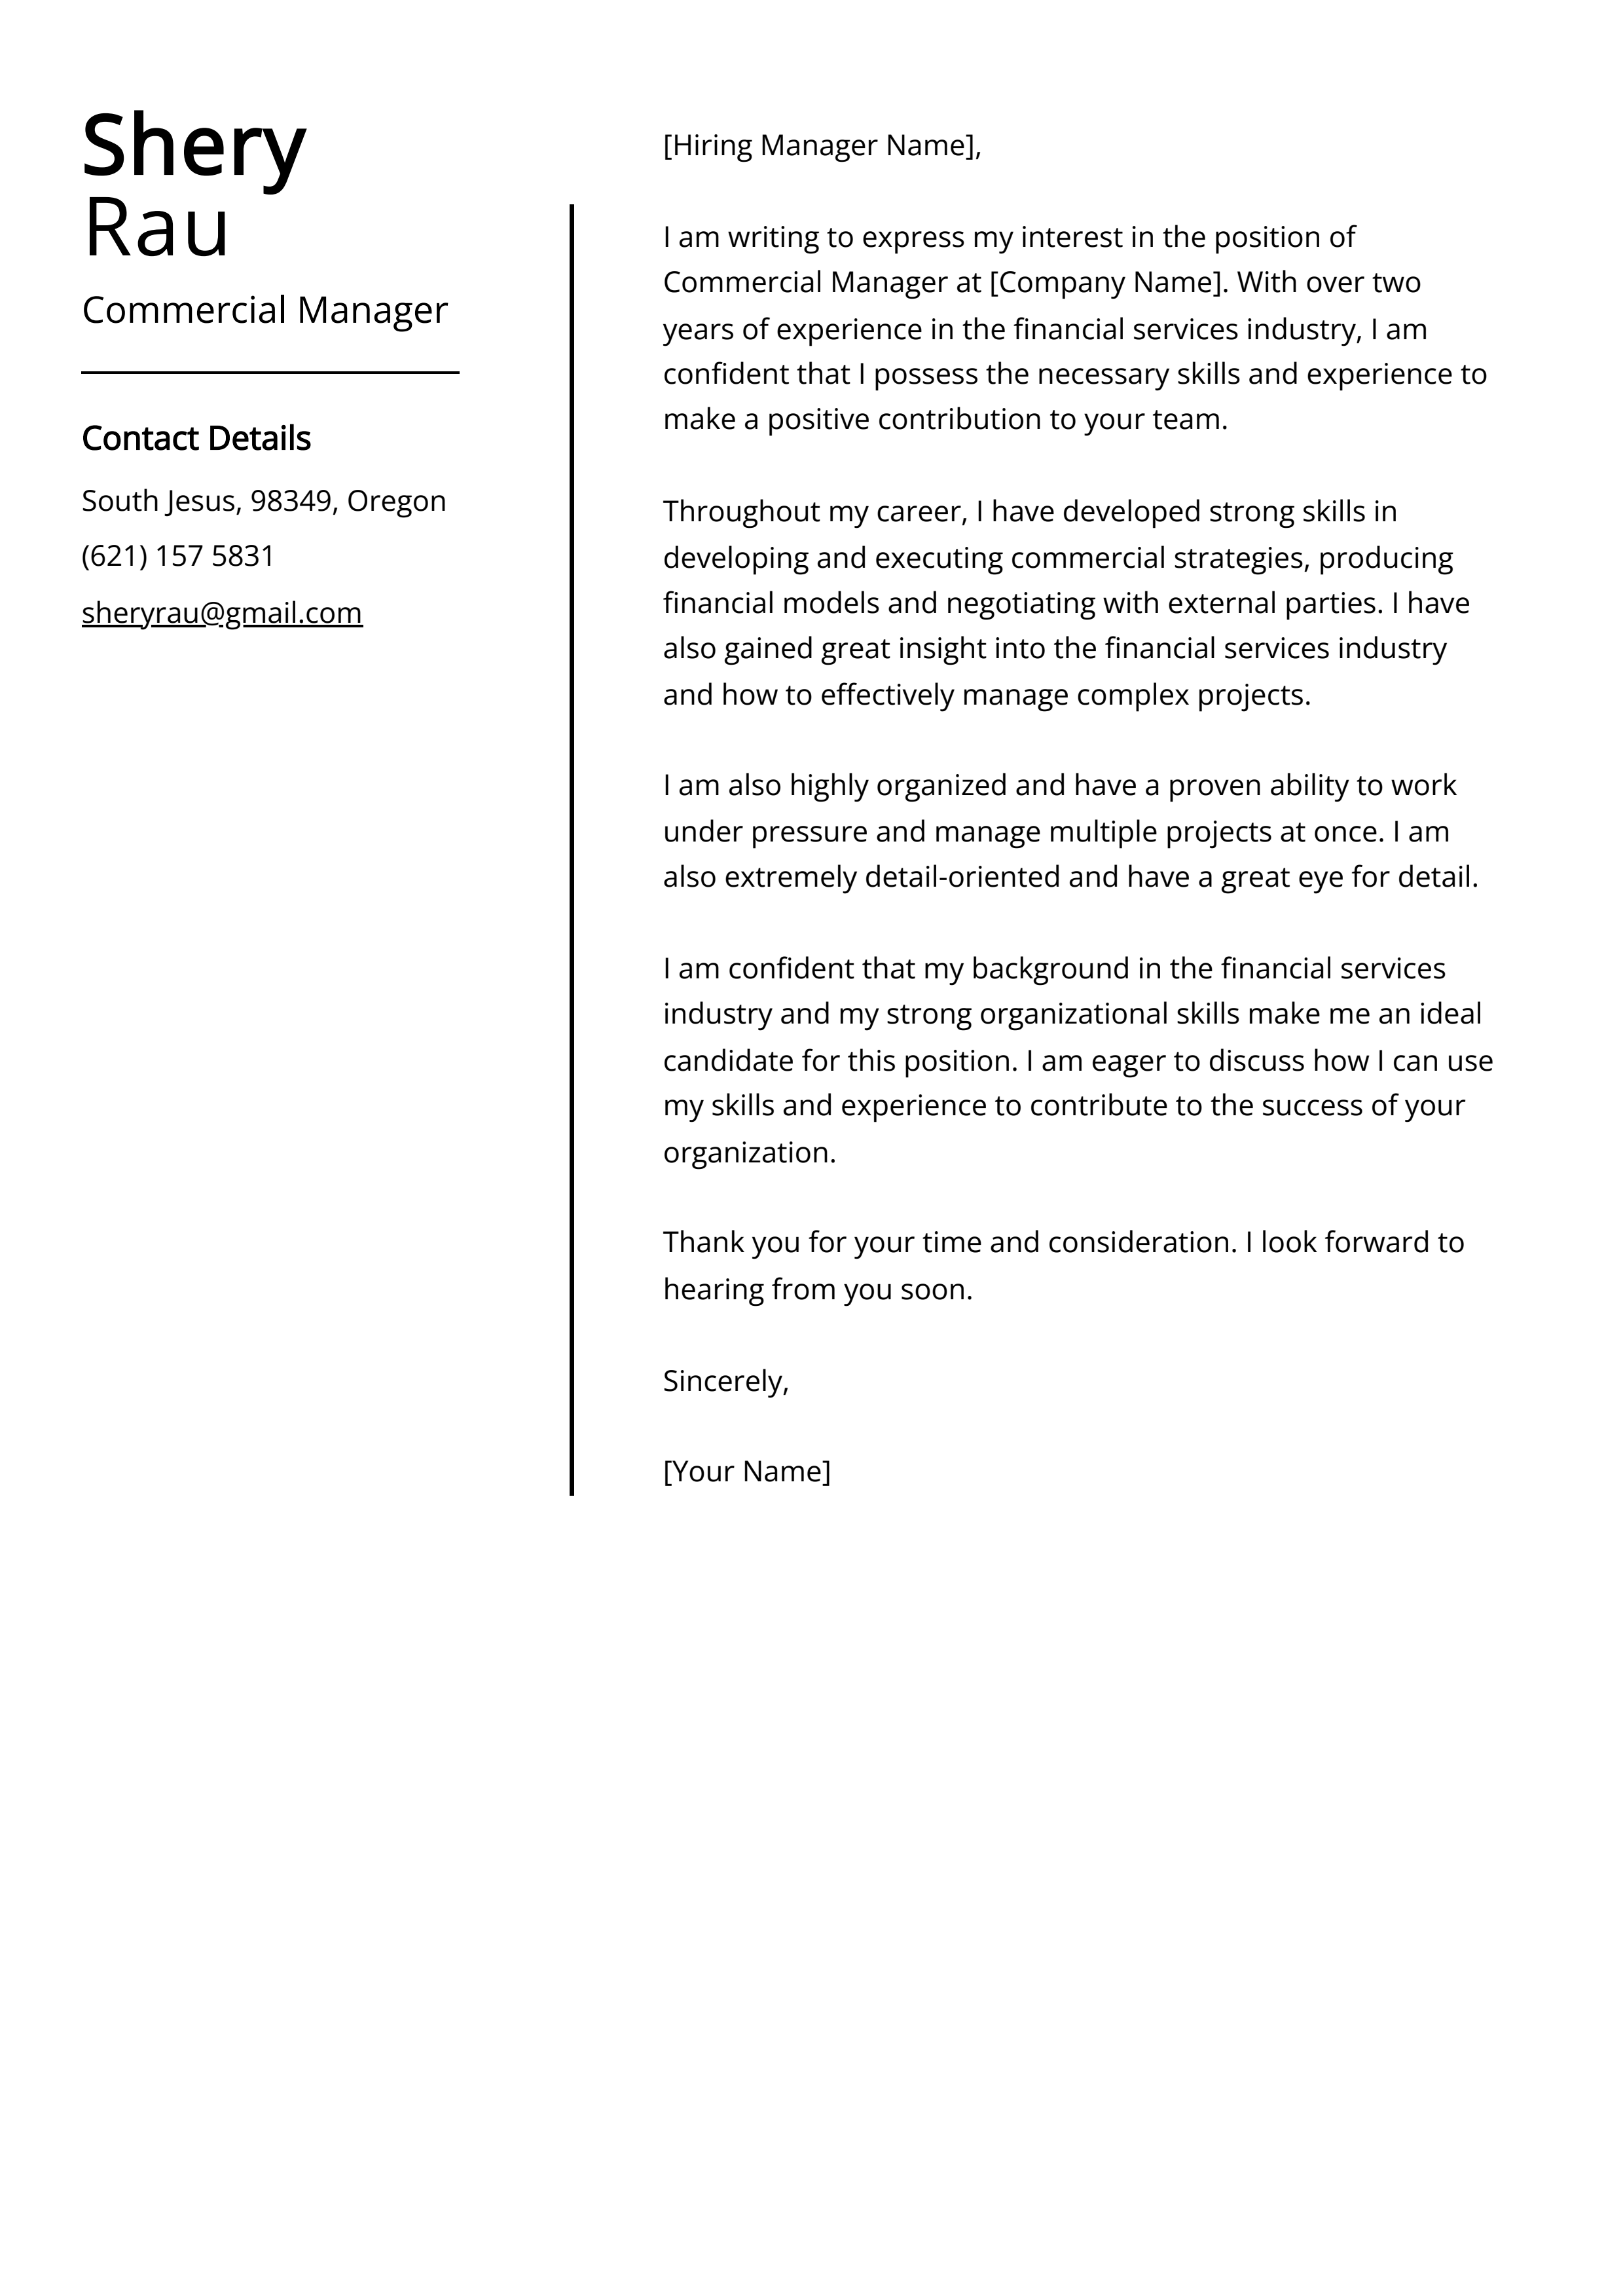 Commercial Manager Cover Letter Example